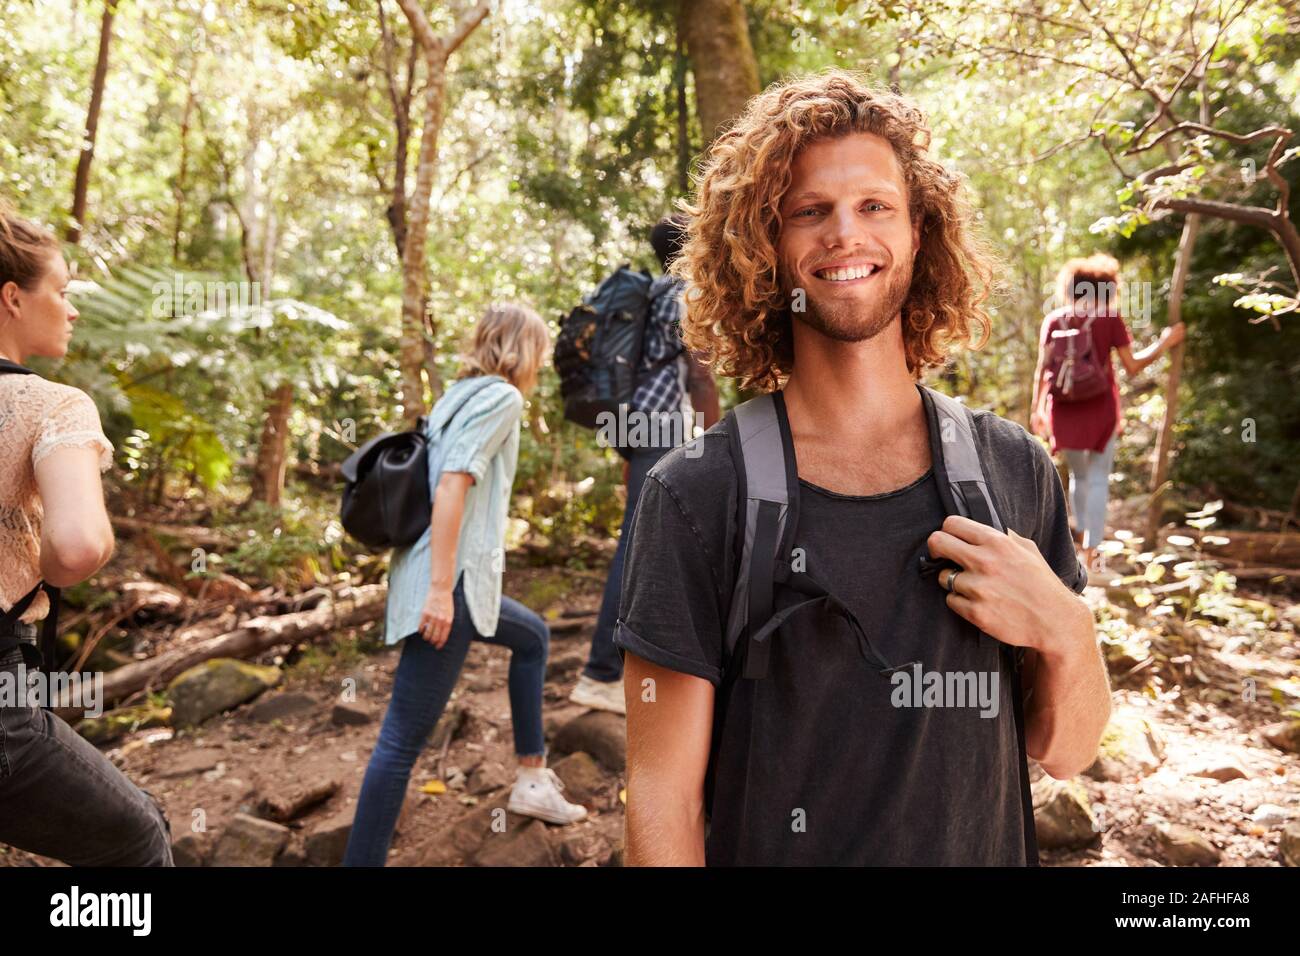 Waist up portrait of smiling millennial white man hiking in a forest with friends, close up Stock Photo